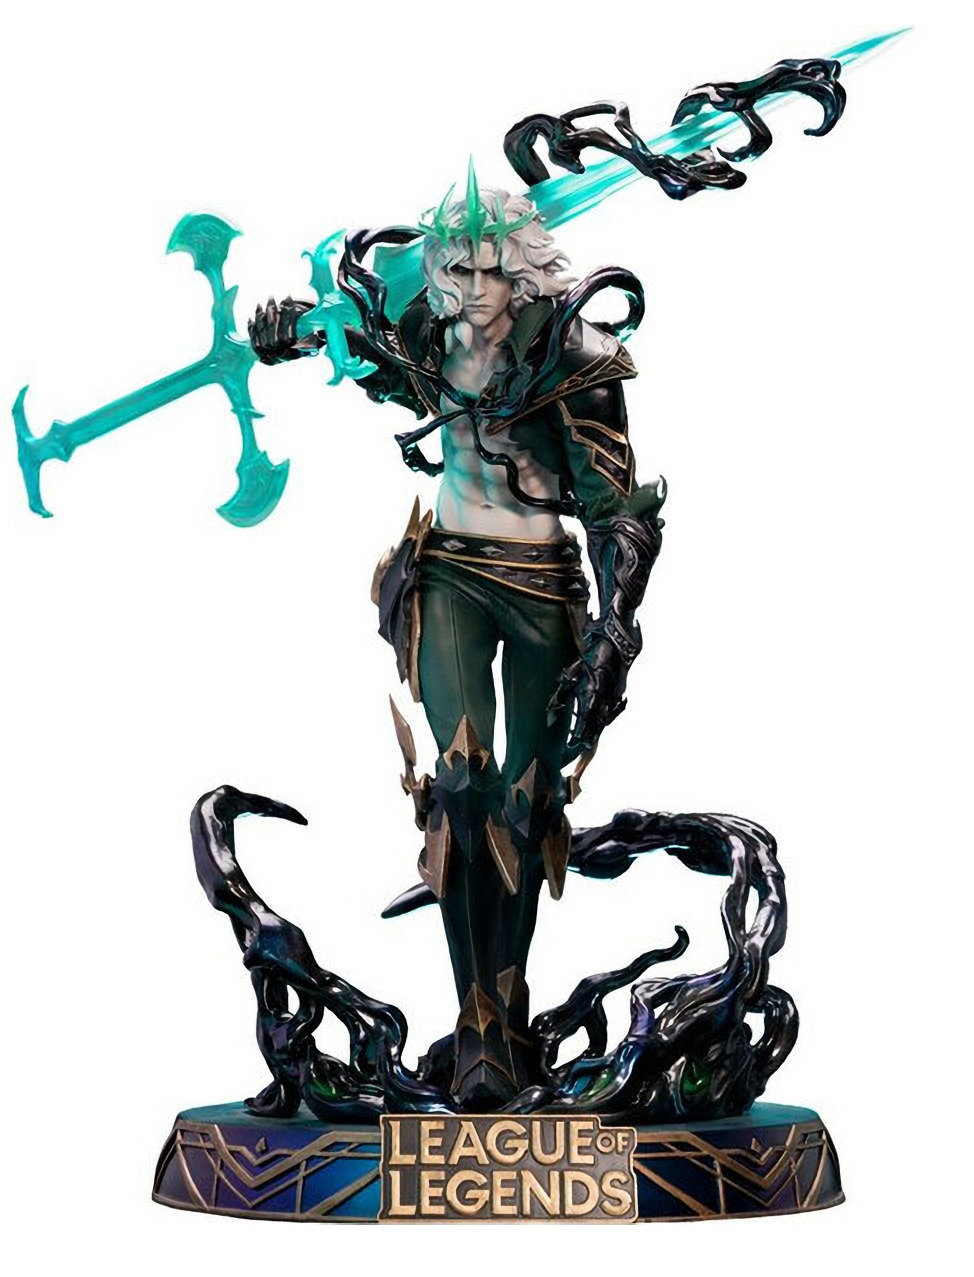 Socha League of Legends - The Ruined King - Viego 1/6 Statue